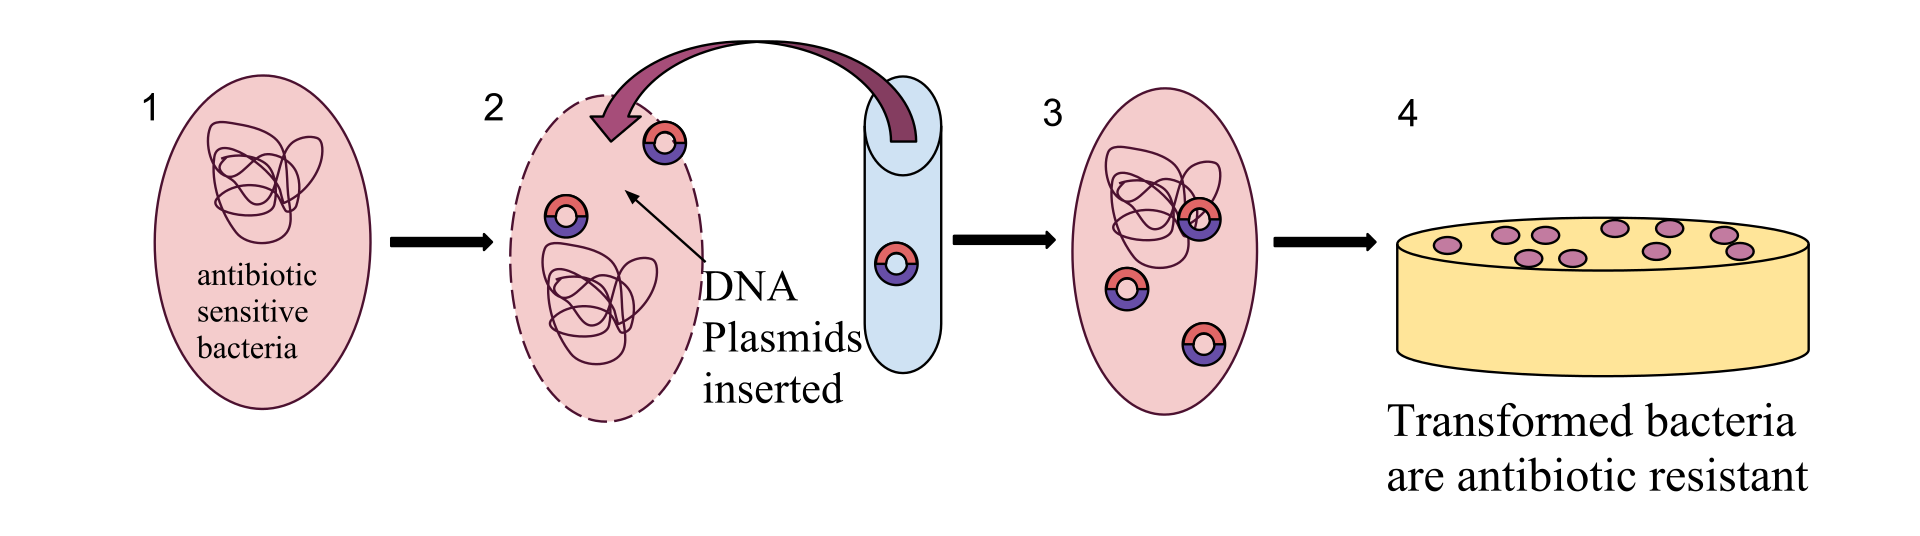 Illustration of transformation of a bacteria to drug resistance. 